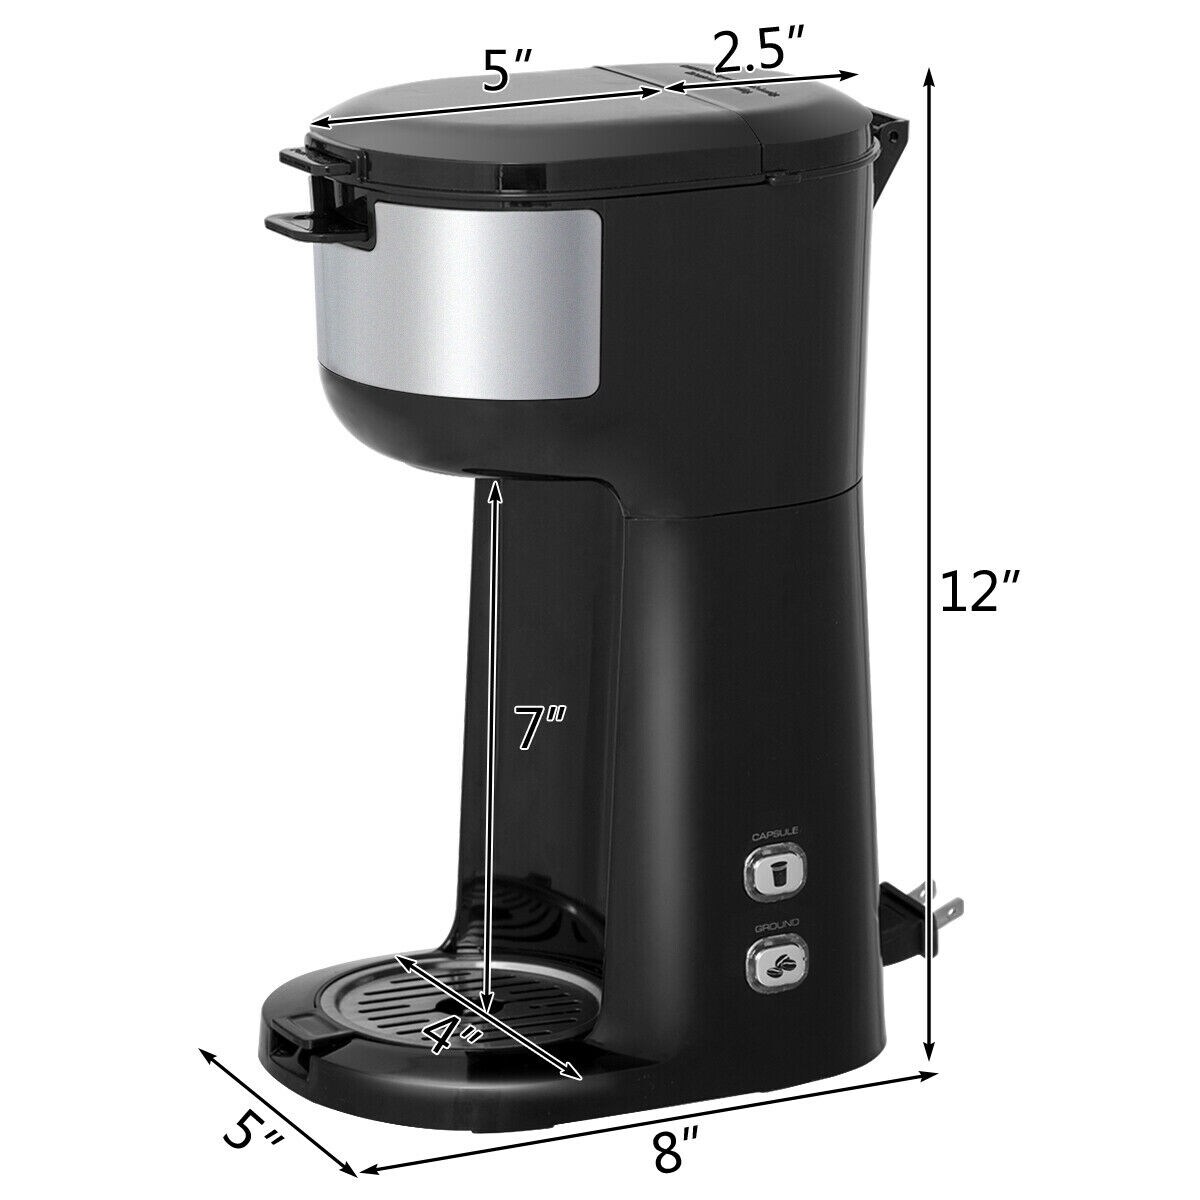 Mainstays Single Serve Coffee Maker For K-cup Capsule & Ground Coffee Dual  Brew